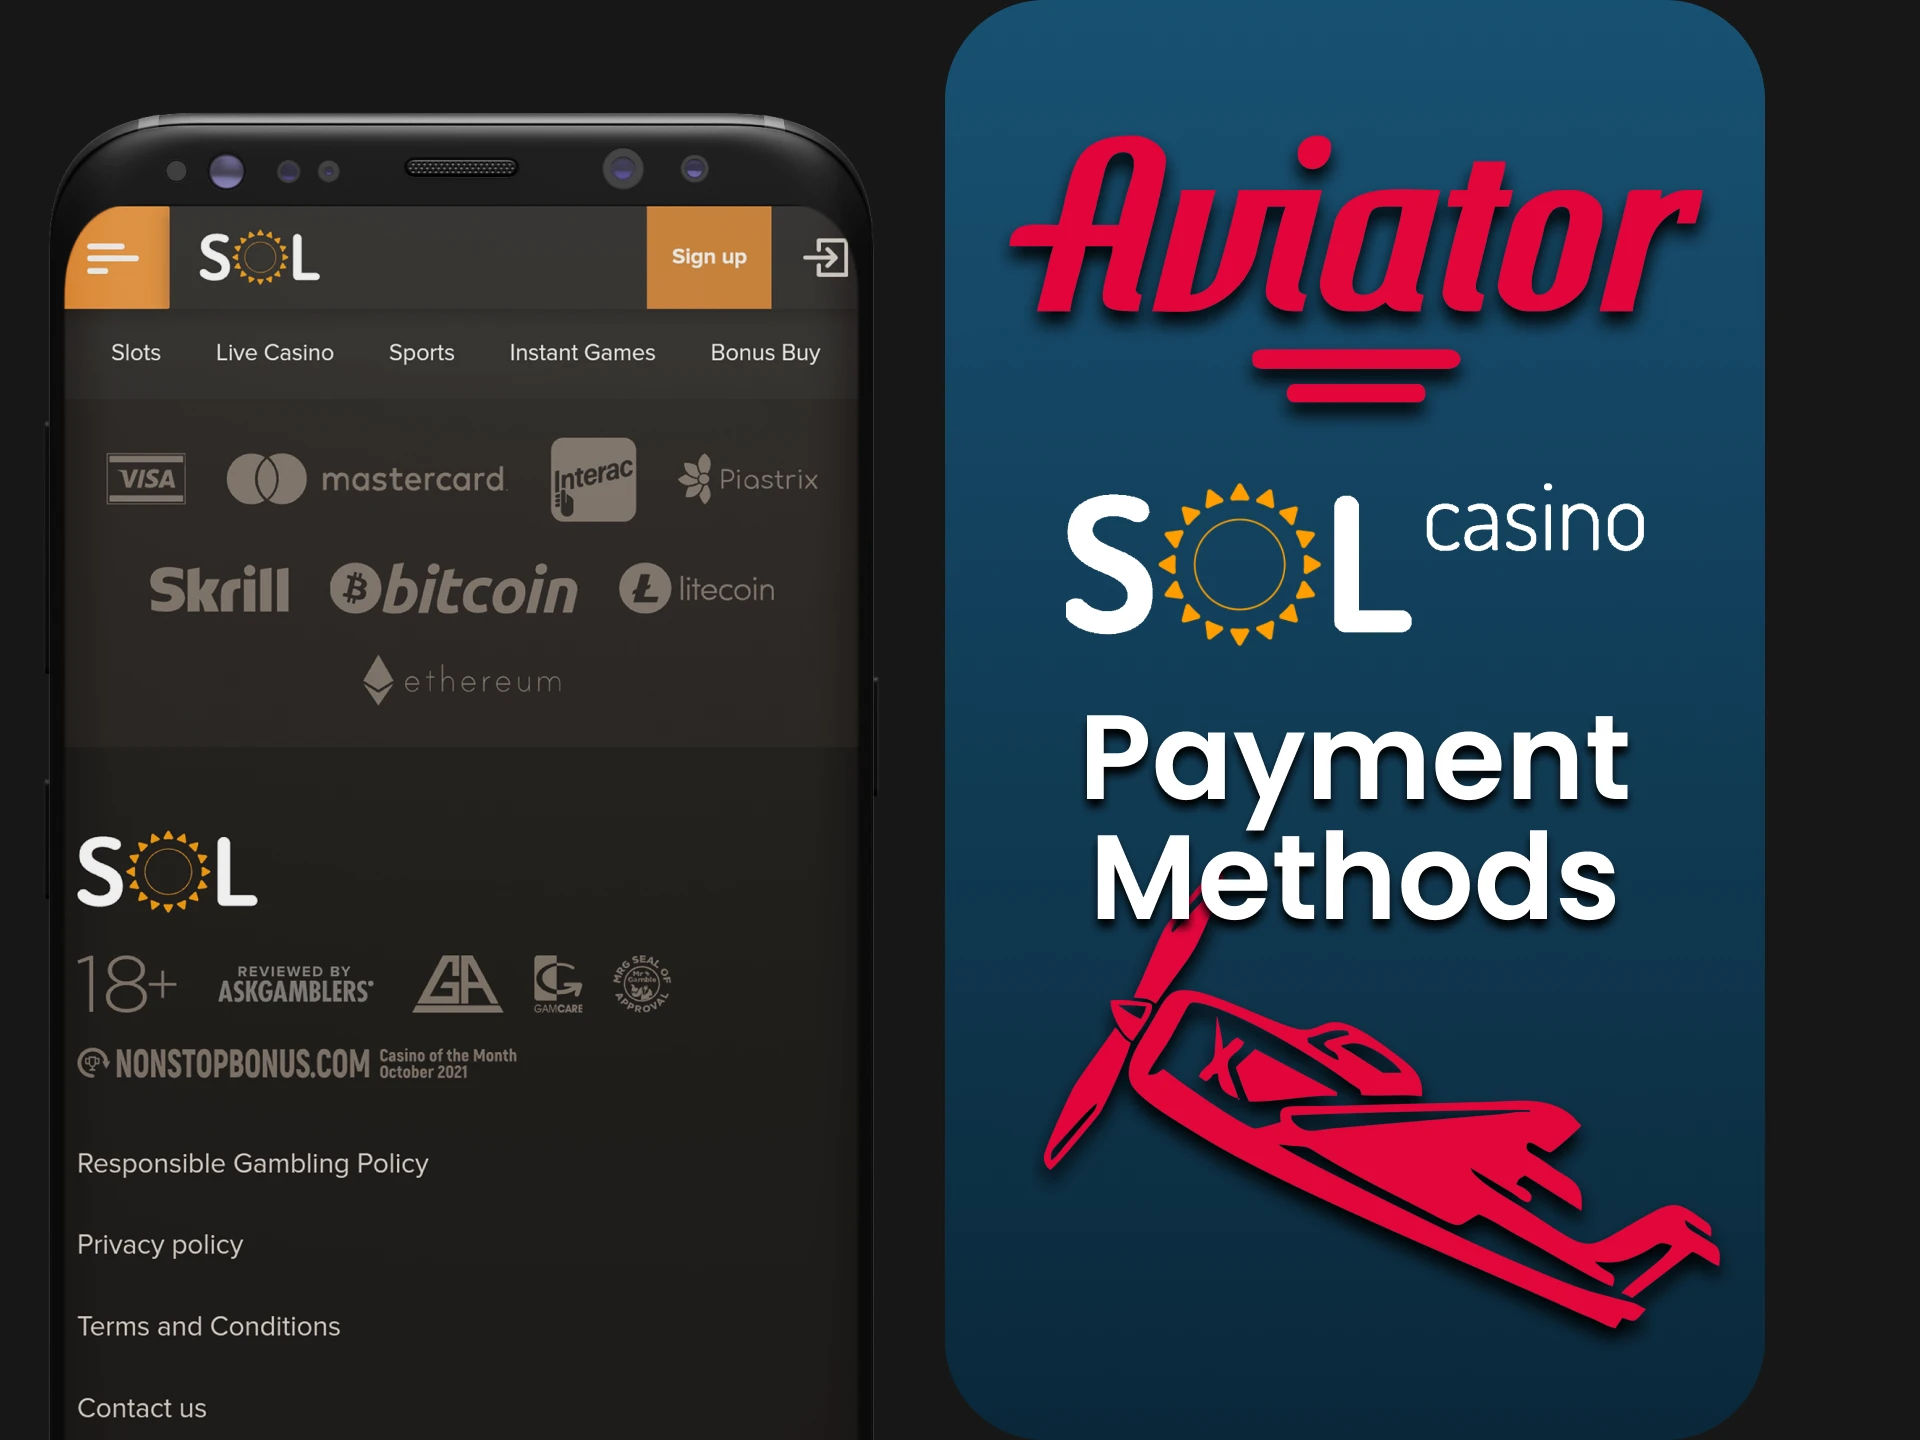 Choose your transaction method in the Sol Casino application for Aviator.